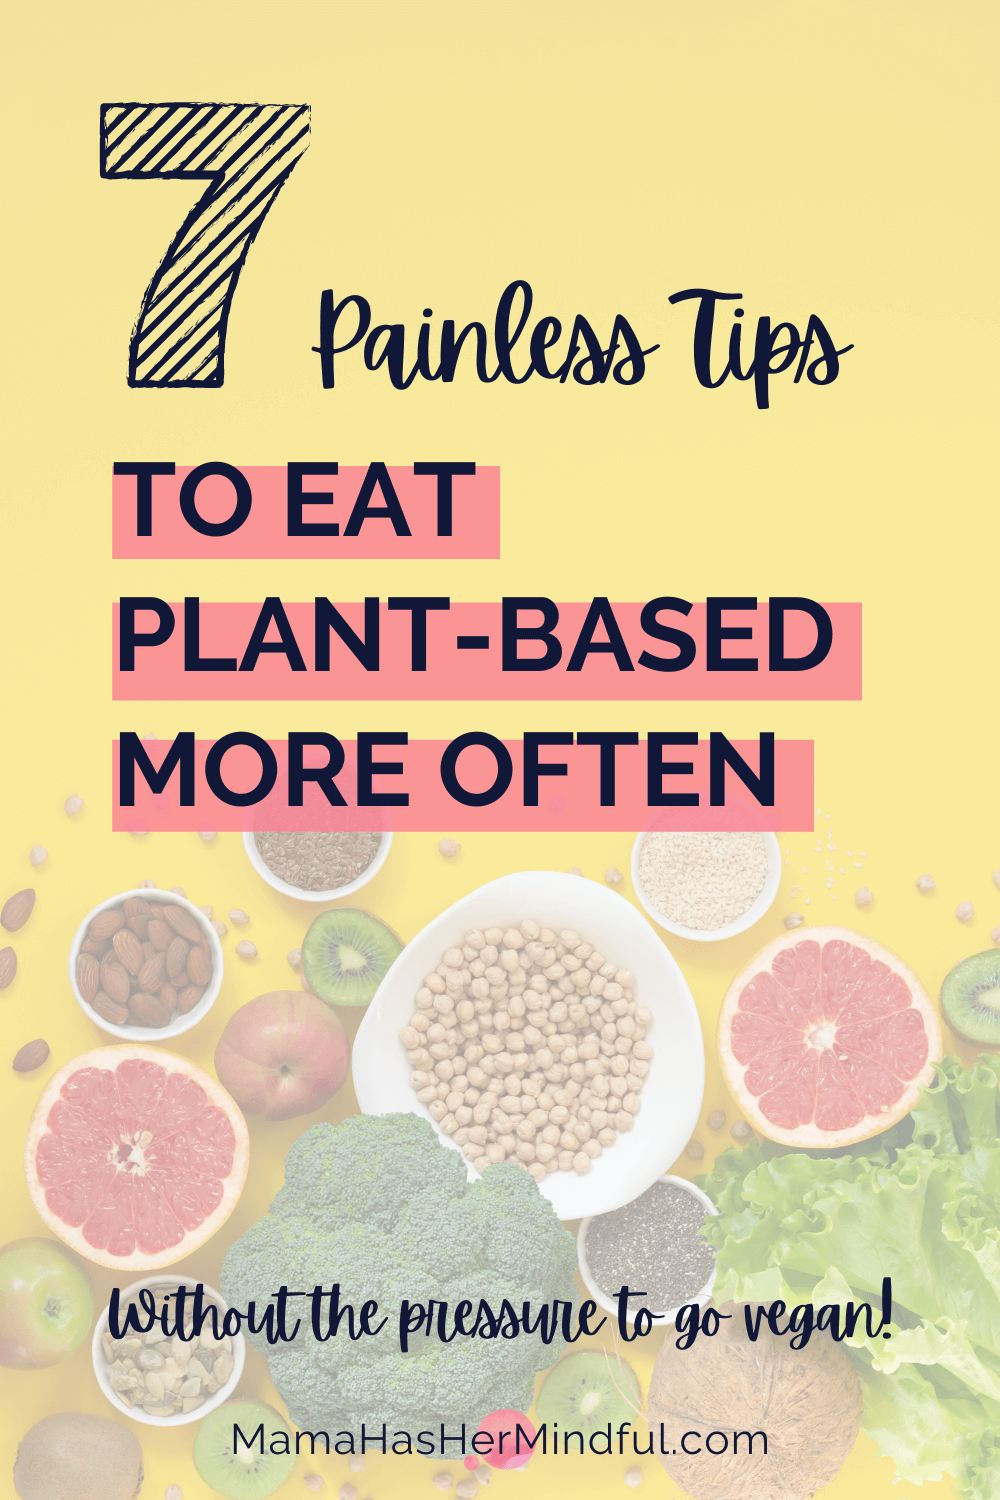 7 Painless Tips to Eat Plant-Based More Often (Without Going Vegan)